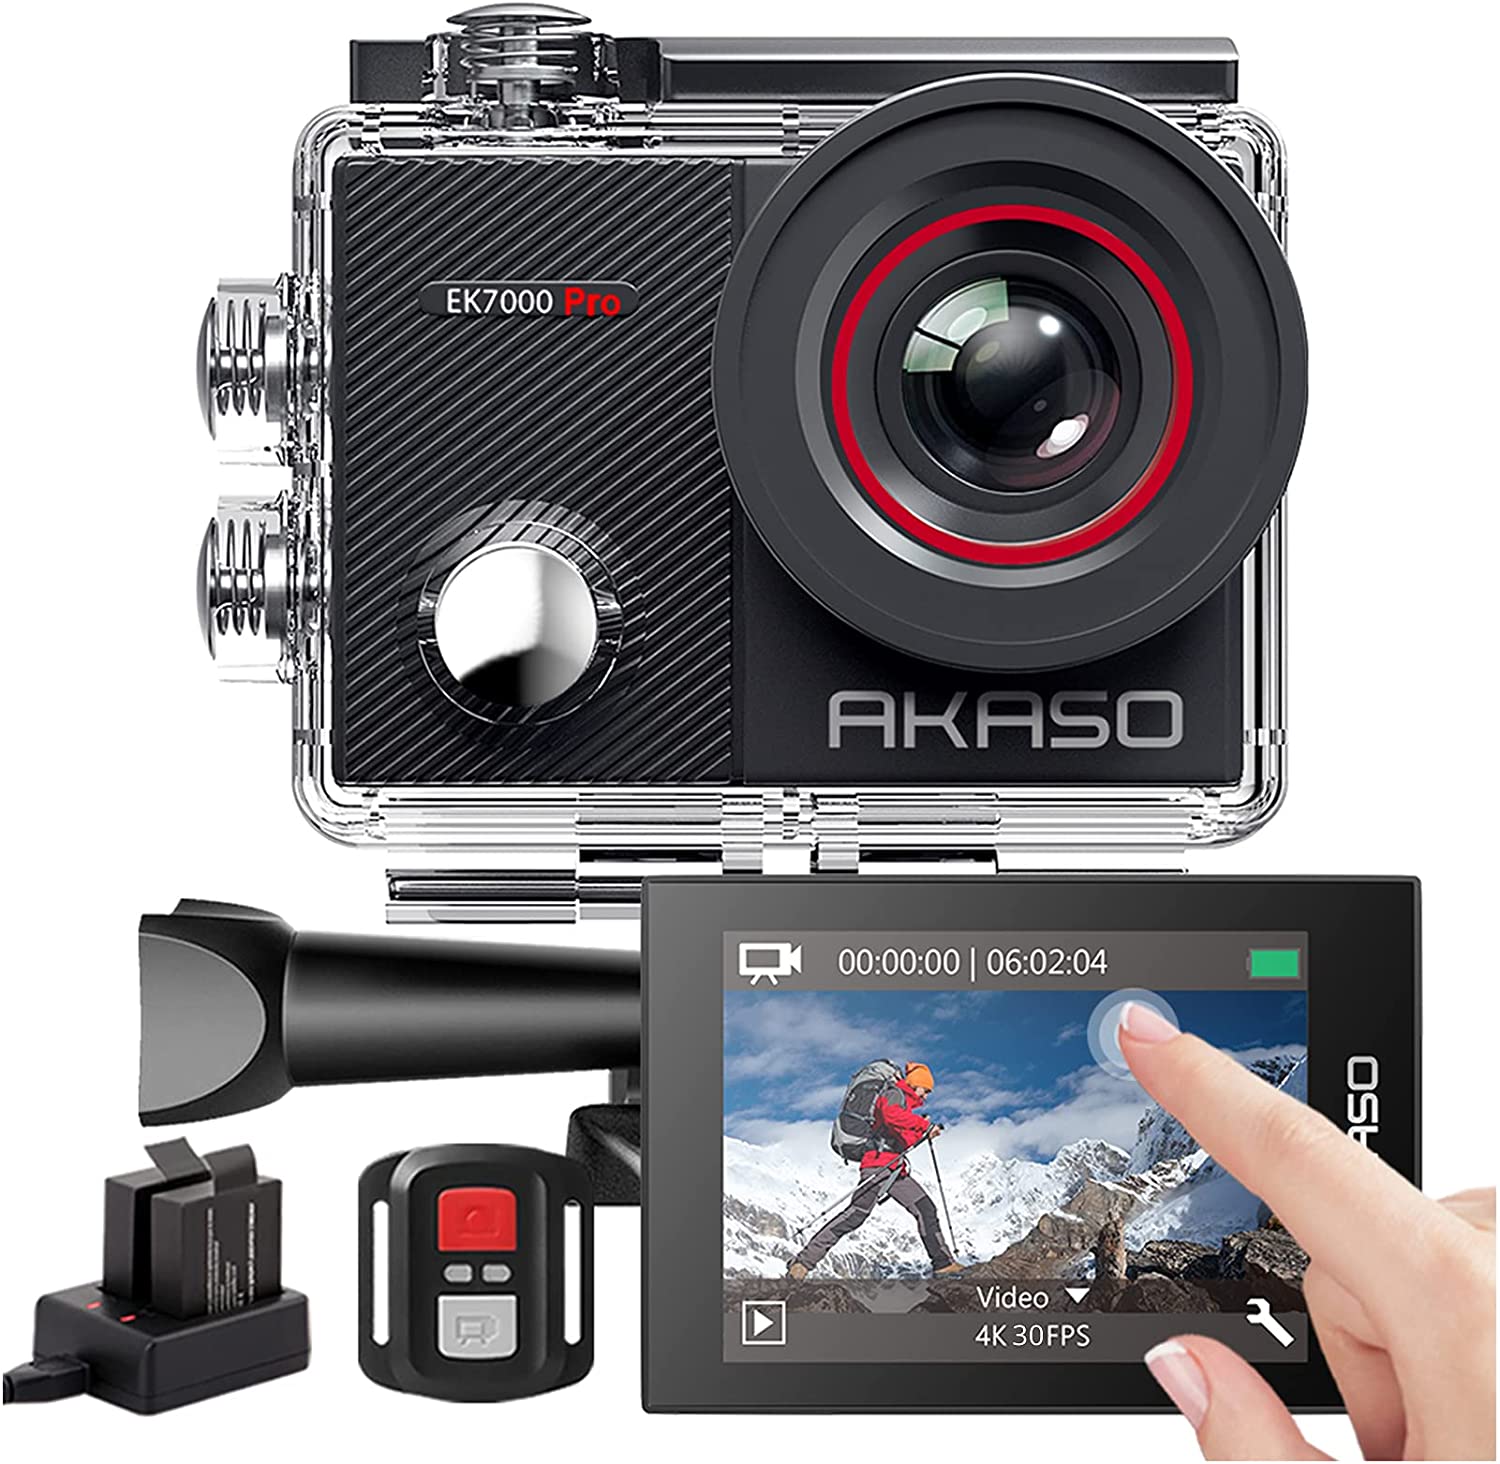 AKASO EK7000 Pro Action Camera with Microphone Pack